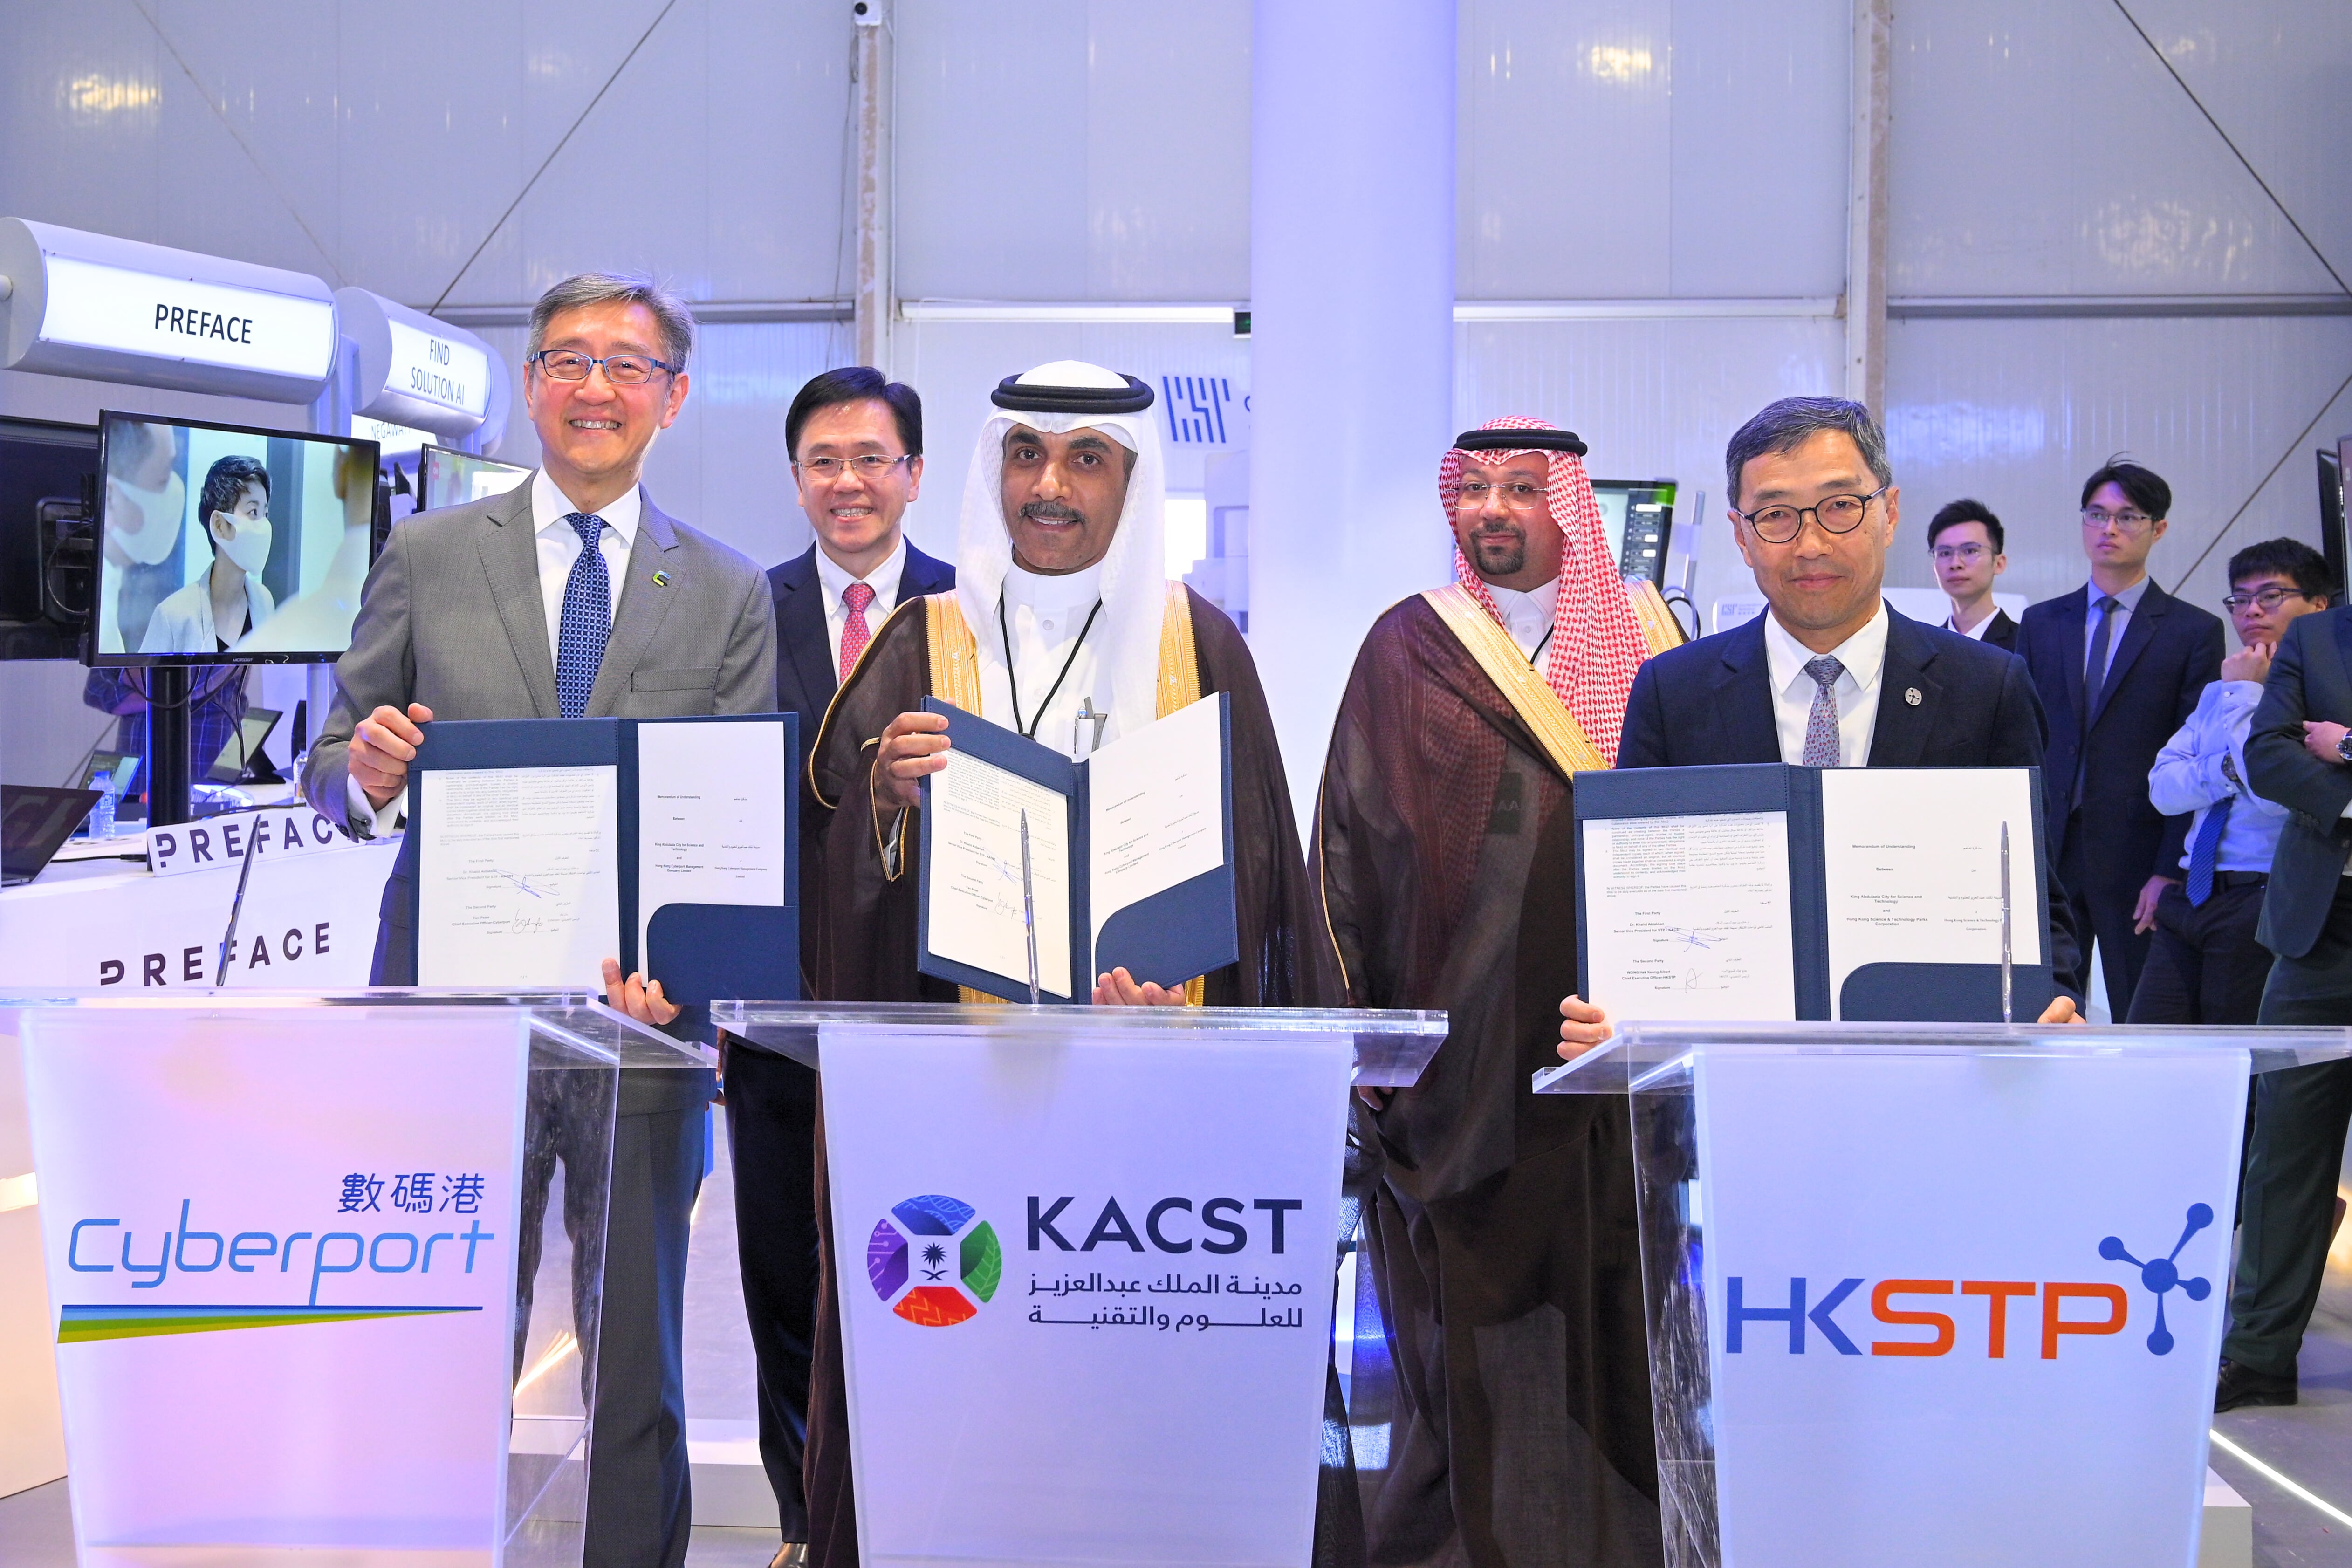 Under the witness of Professor Sun Dong, Secretary for Innovation, Technology and Industry of the HKSAR Government (second from left) and H.E. Dr. Munir M. Eldesouki, President, King Abdulaziz City for Science and Technology (second from right), Mr Albert Wong, CEO of HKSTP (first from right), and Mr Peter Yan, CEO of Cyberport (first from left), signed a MoU with Dr. Khalid A. Aldakkan, Senior Vice President for Innovation Parks, KACST (middle), to form a strategic partnership between the Hong Kong and Saudi I&T ecosystems, accelerating the growth and development of start-ups and talent.